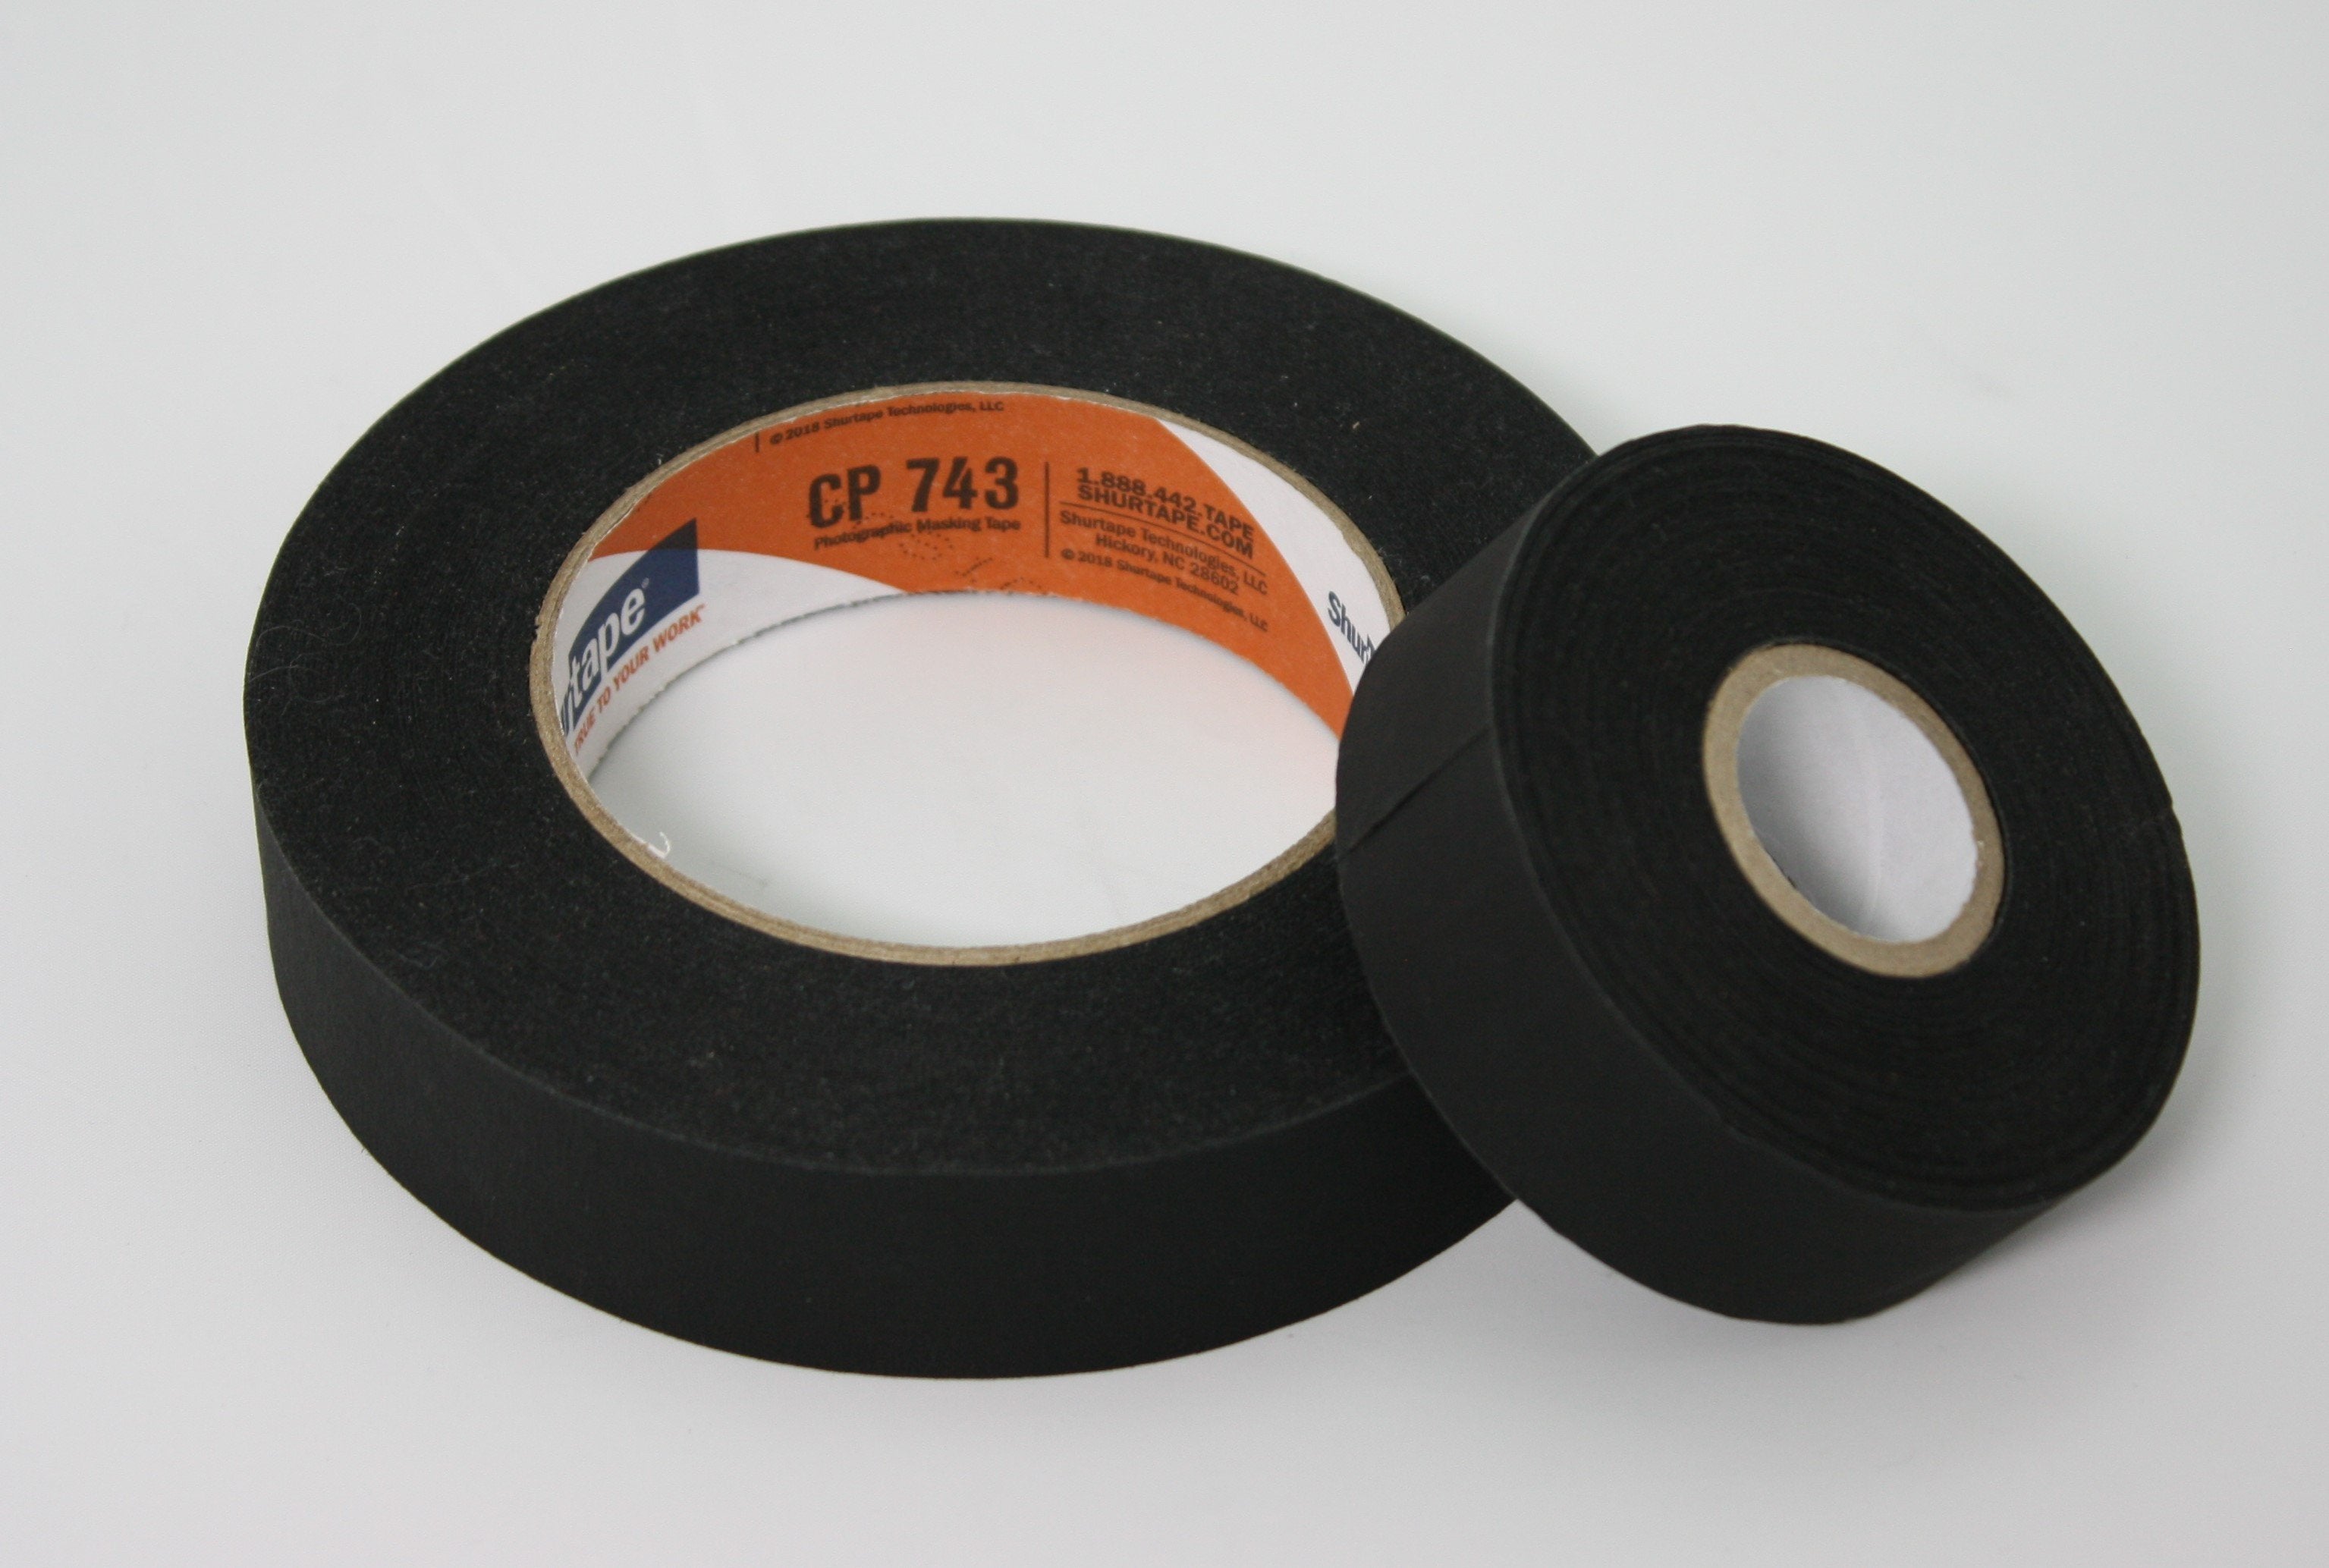 Shurtape CP-743 Matte Photo Tape, 1", small core roll and a 1" normal core roll side by side, lying flat